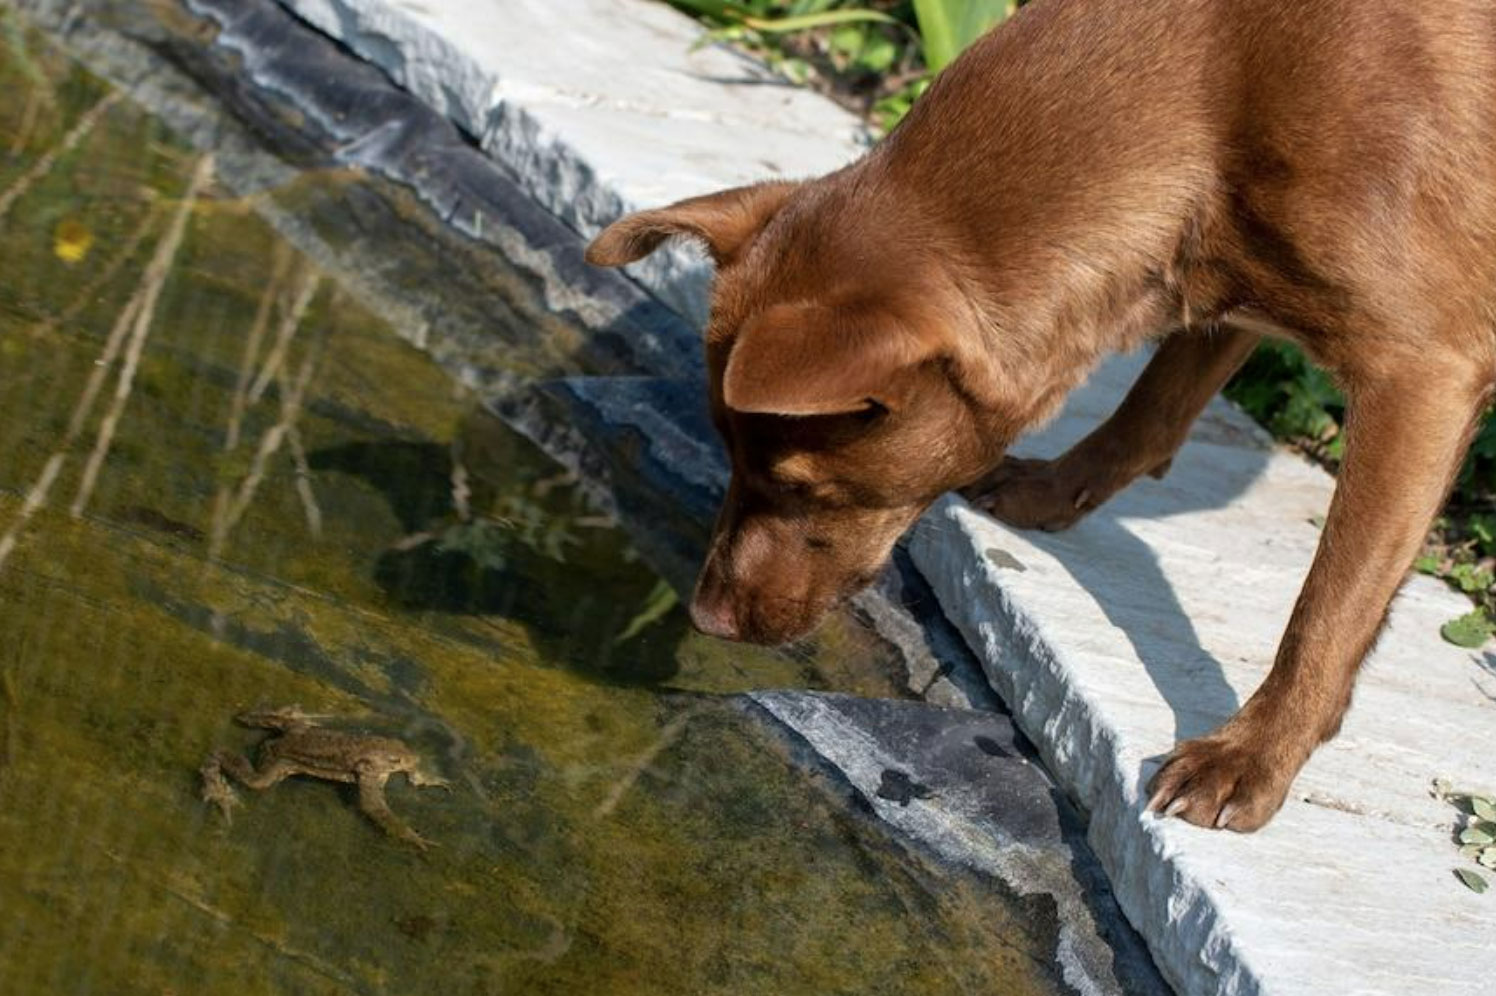 Clayfield Vet - How to prevent your dog coming into contact with cane toads